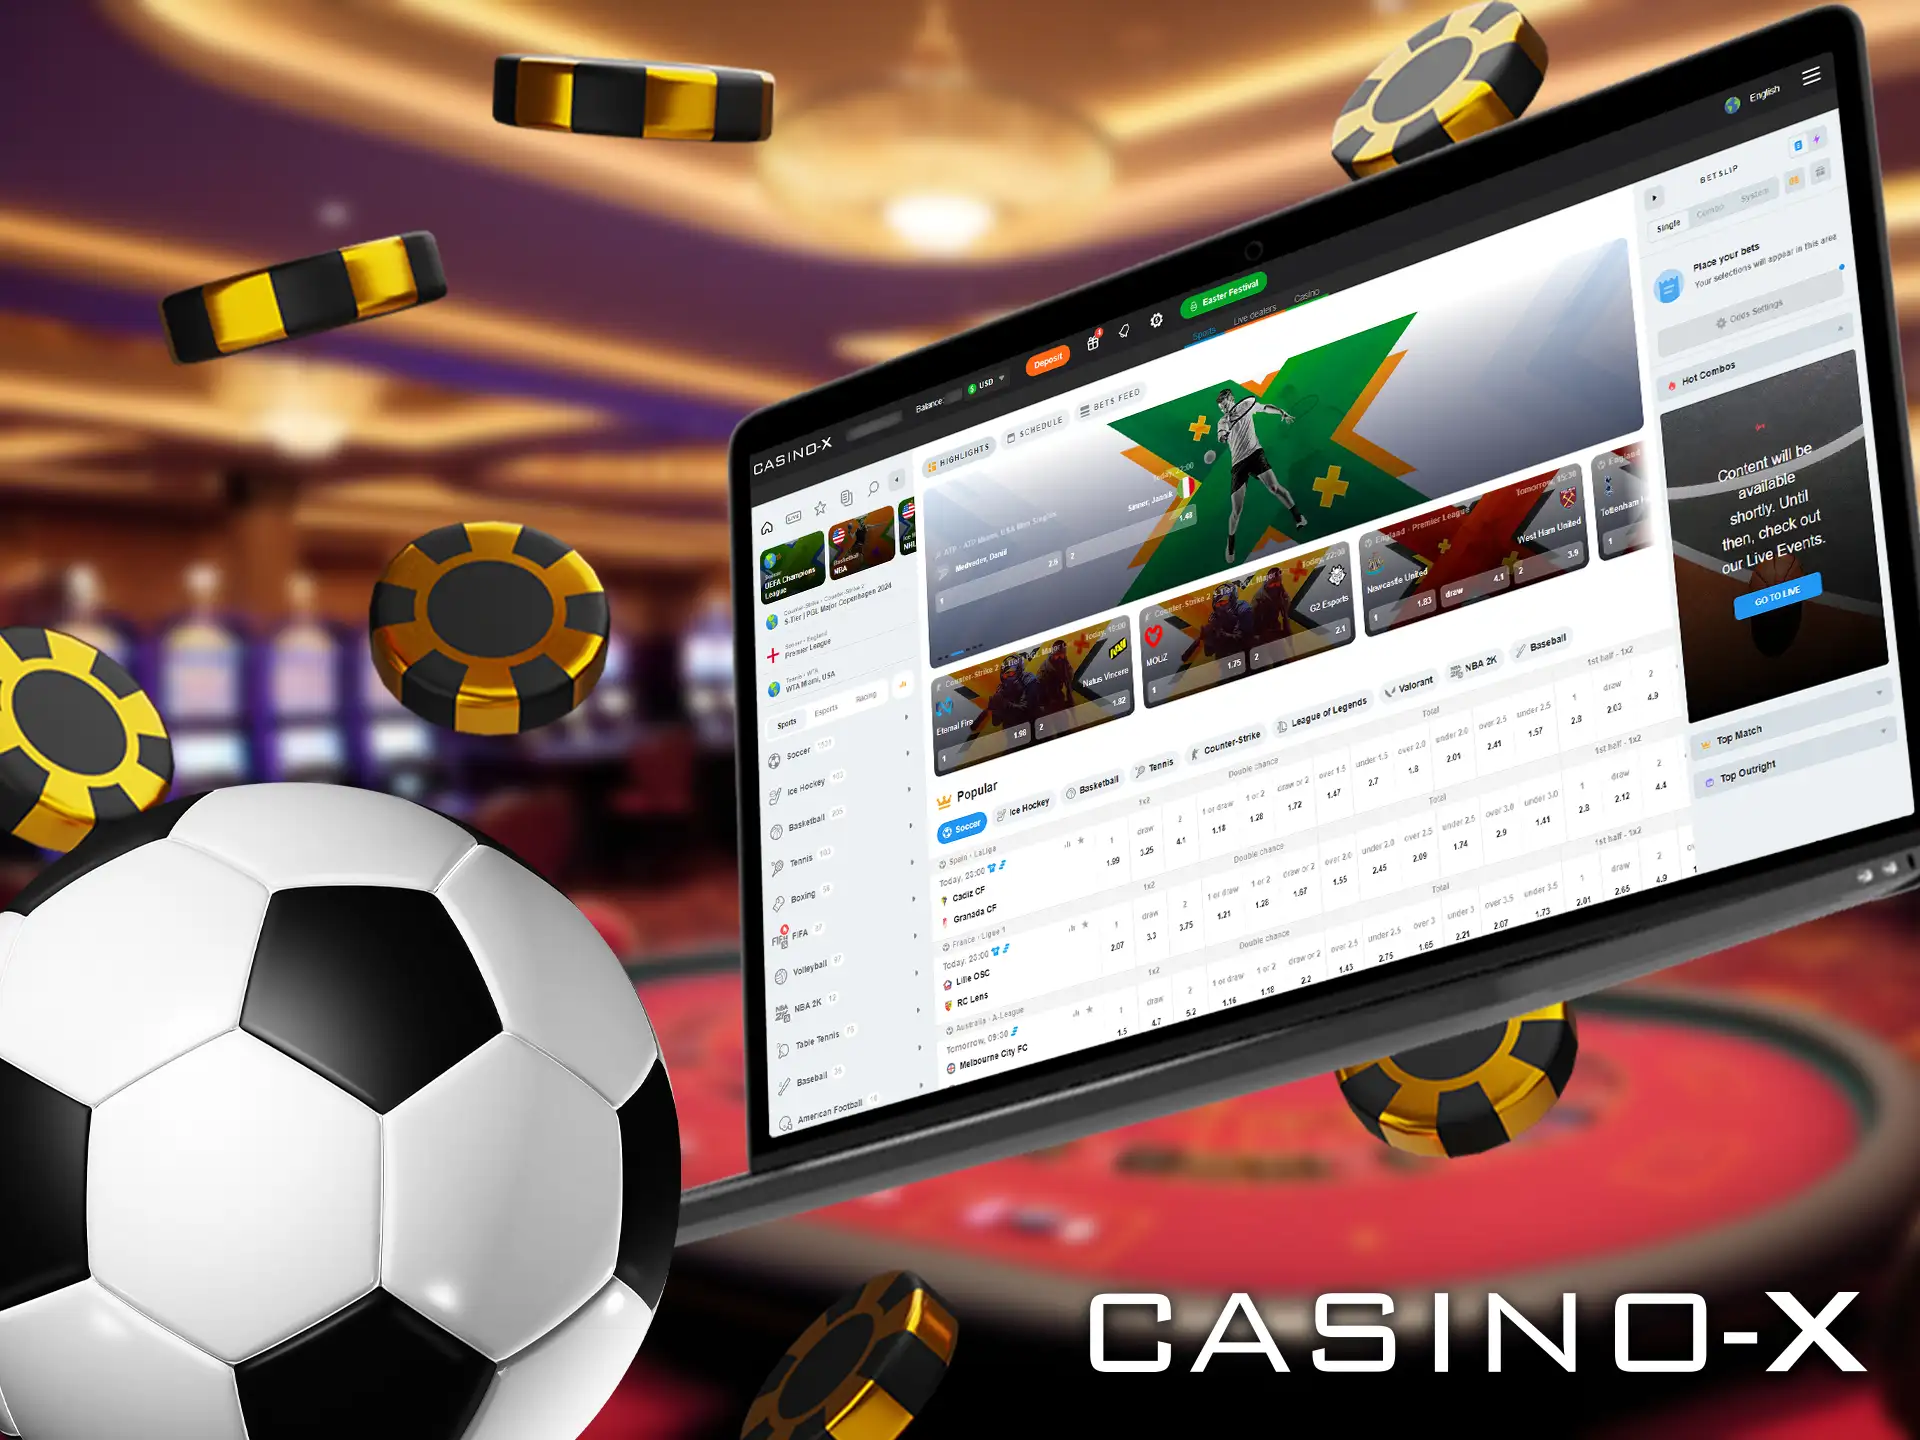 Sign up and start betting at Casino-X!